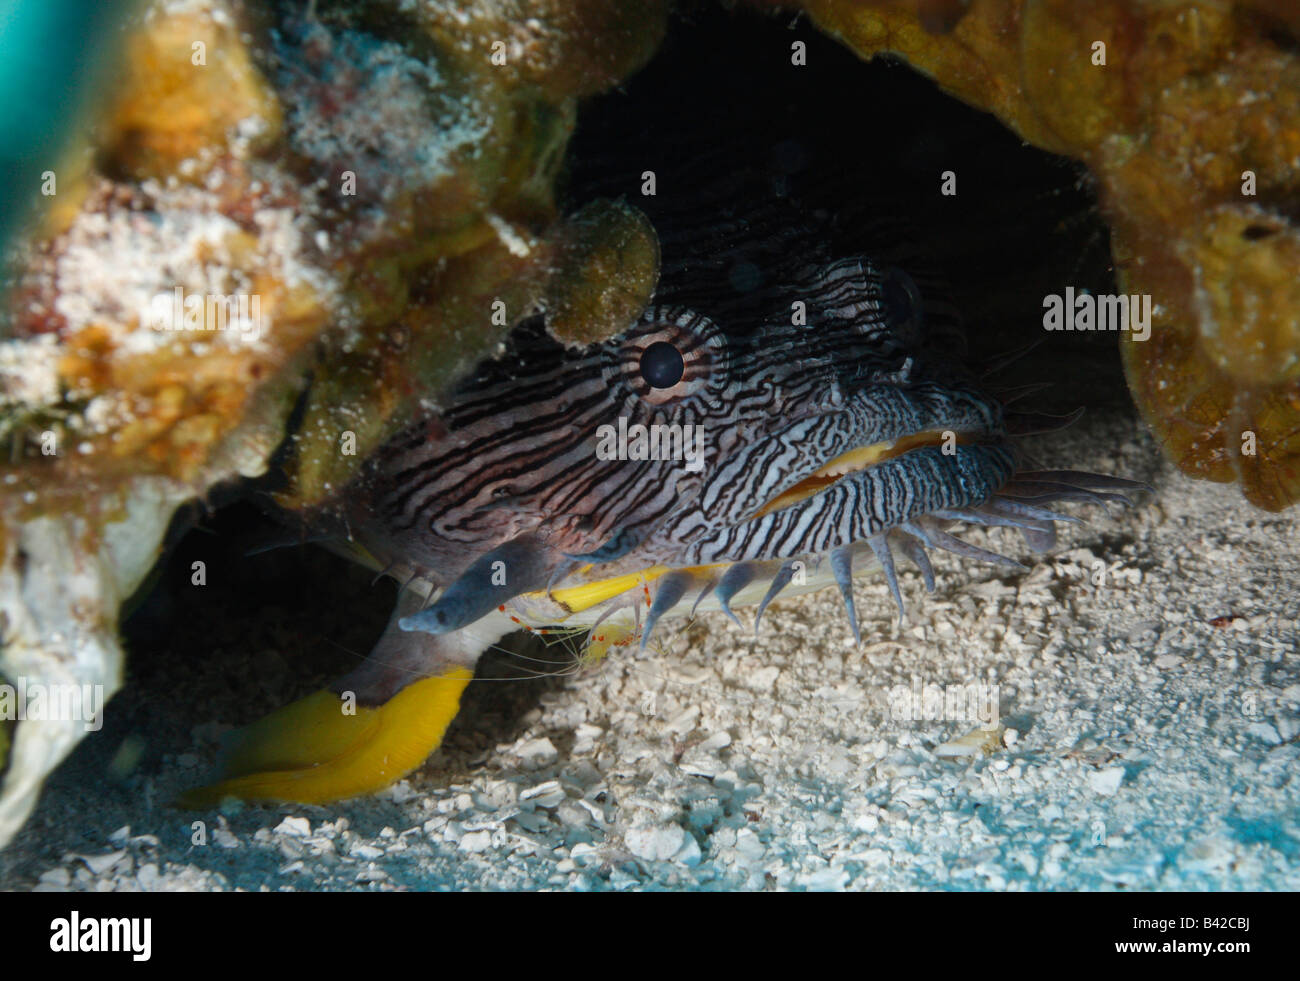 Splendid toadfish in his burrow getting cleaned by a Scarlet-Striped Cleaning Shrimp Stock Photo